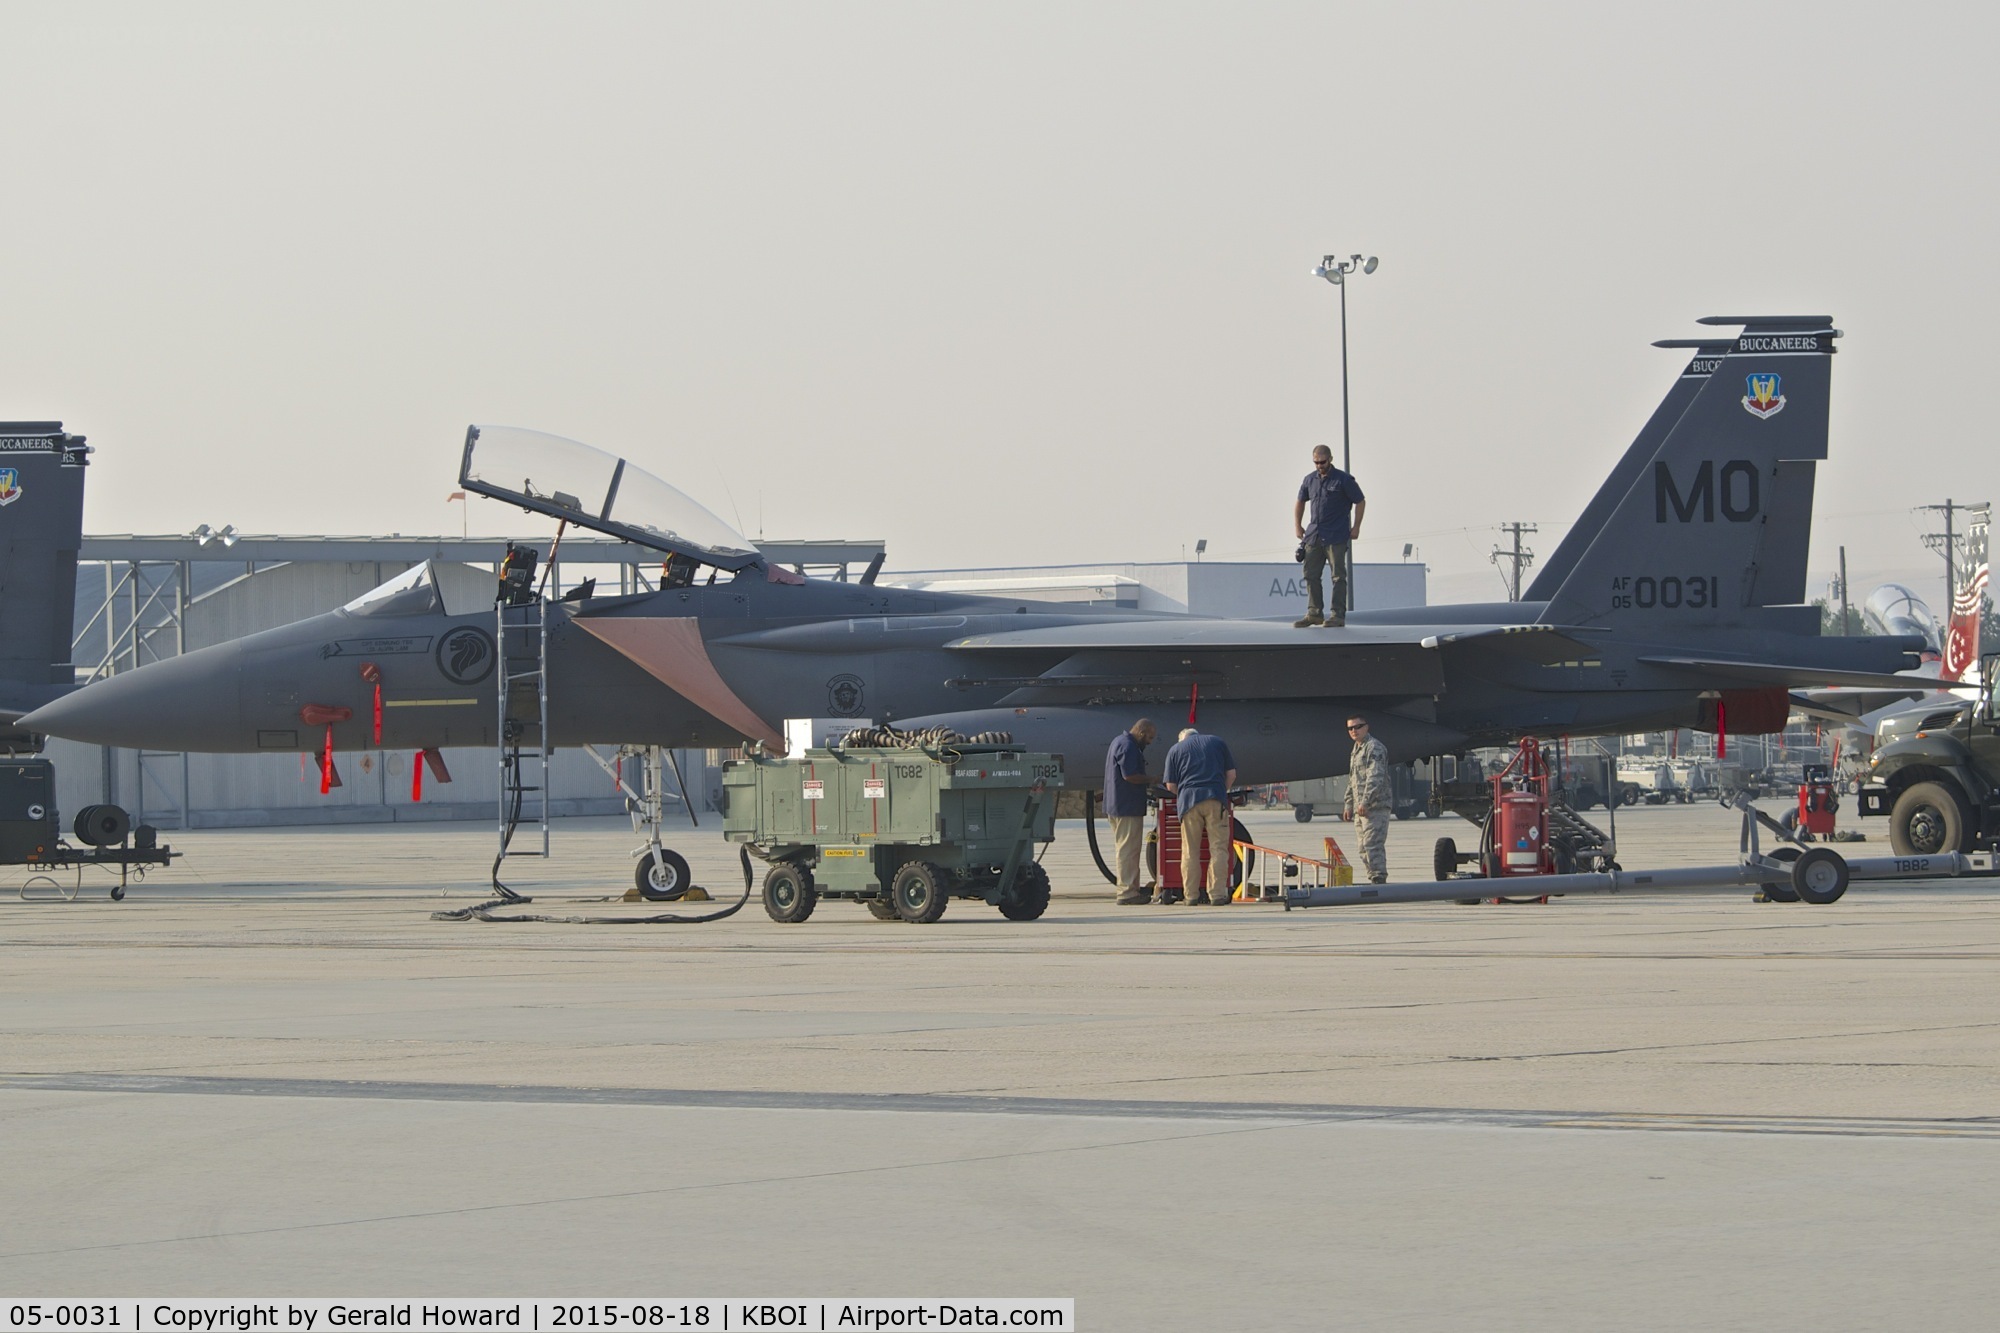 05-0031, 2005 Boeing F-15SG Strike Eagle C/N SG31, Undergoing maintenance on the Idaho ANG ramp.  428th Fighter Sq.